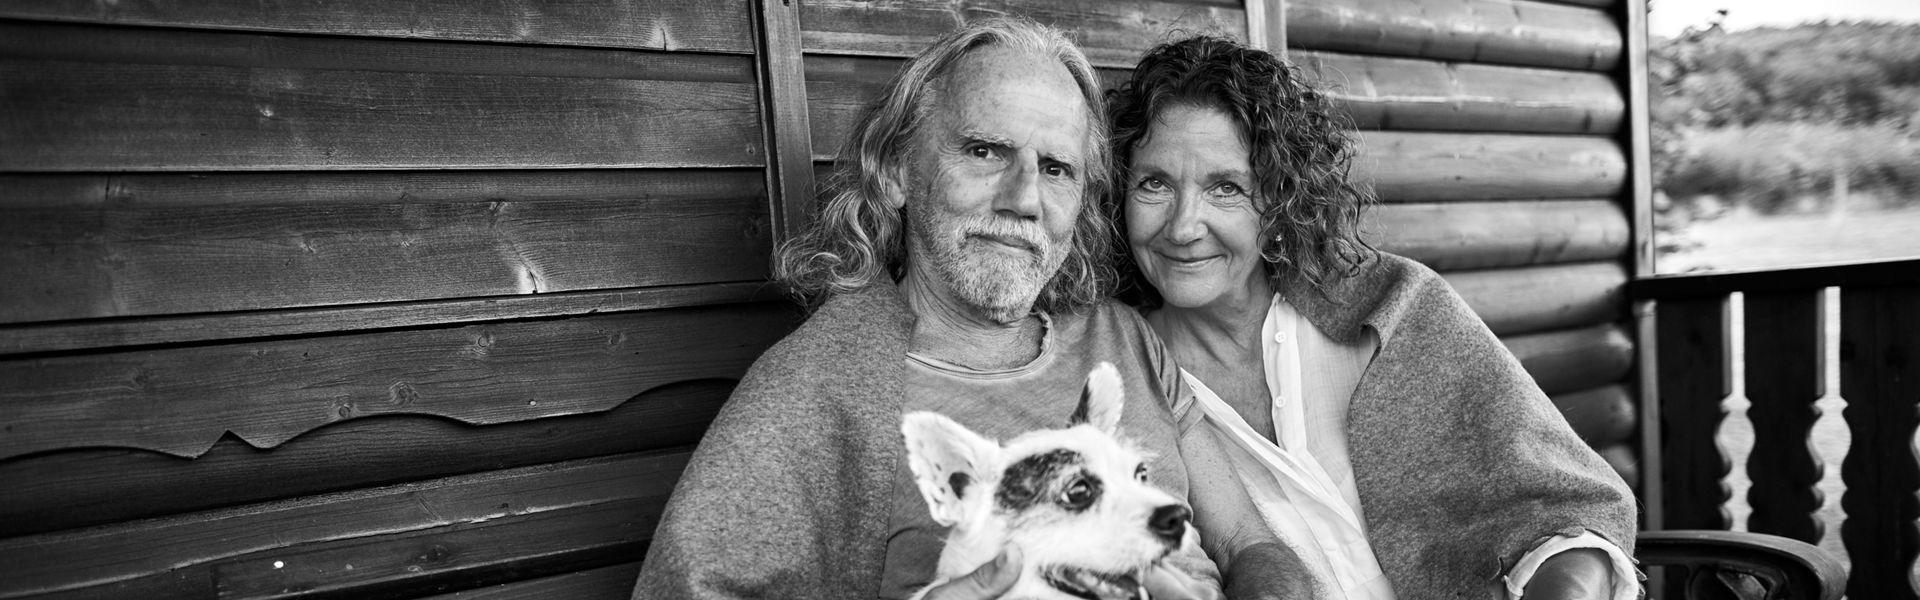 Senior couple with dog on cabin porch